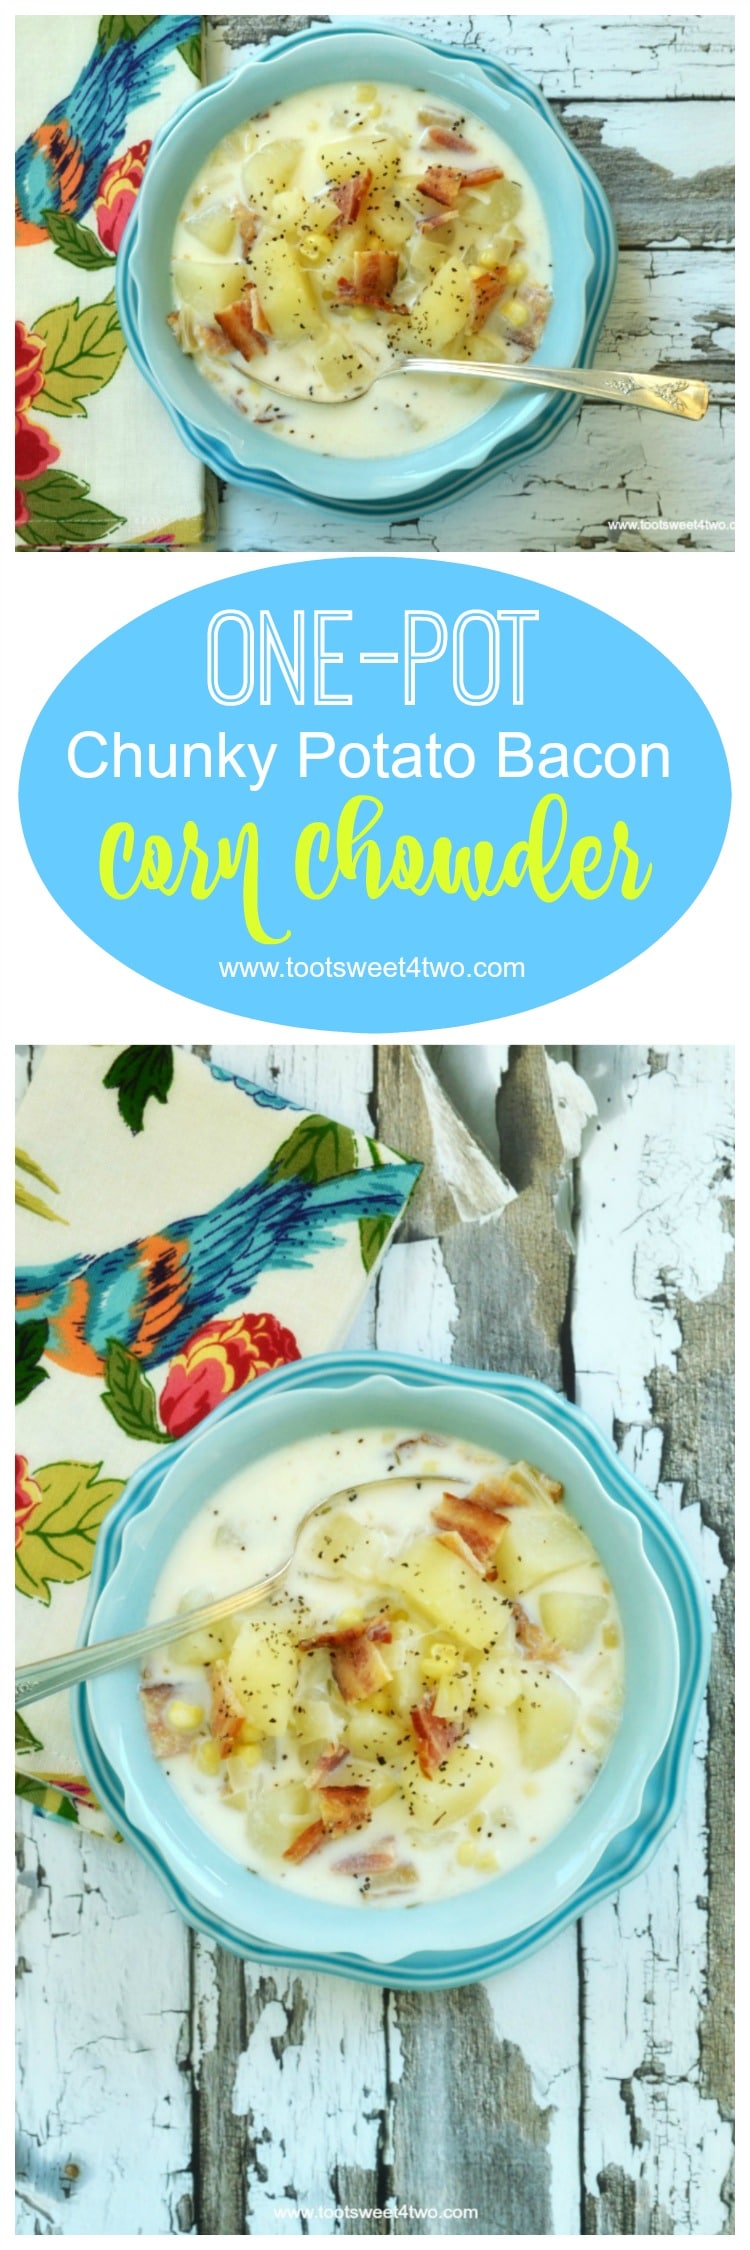 Chunky potatoes, savory bacon and sweet corn combine in this near-perfect one-pot soup recipe. Creamy and delicious, One-Pot Chunky Potato Bacon Corn Chowder is easy to make and sure to please even the pickiest eater in your family! Made in one pot, clean-up is easy, too! | www.tootsweet4two.com